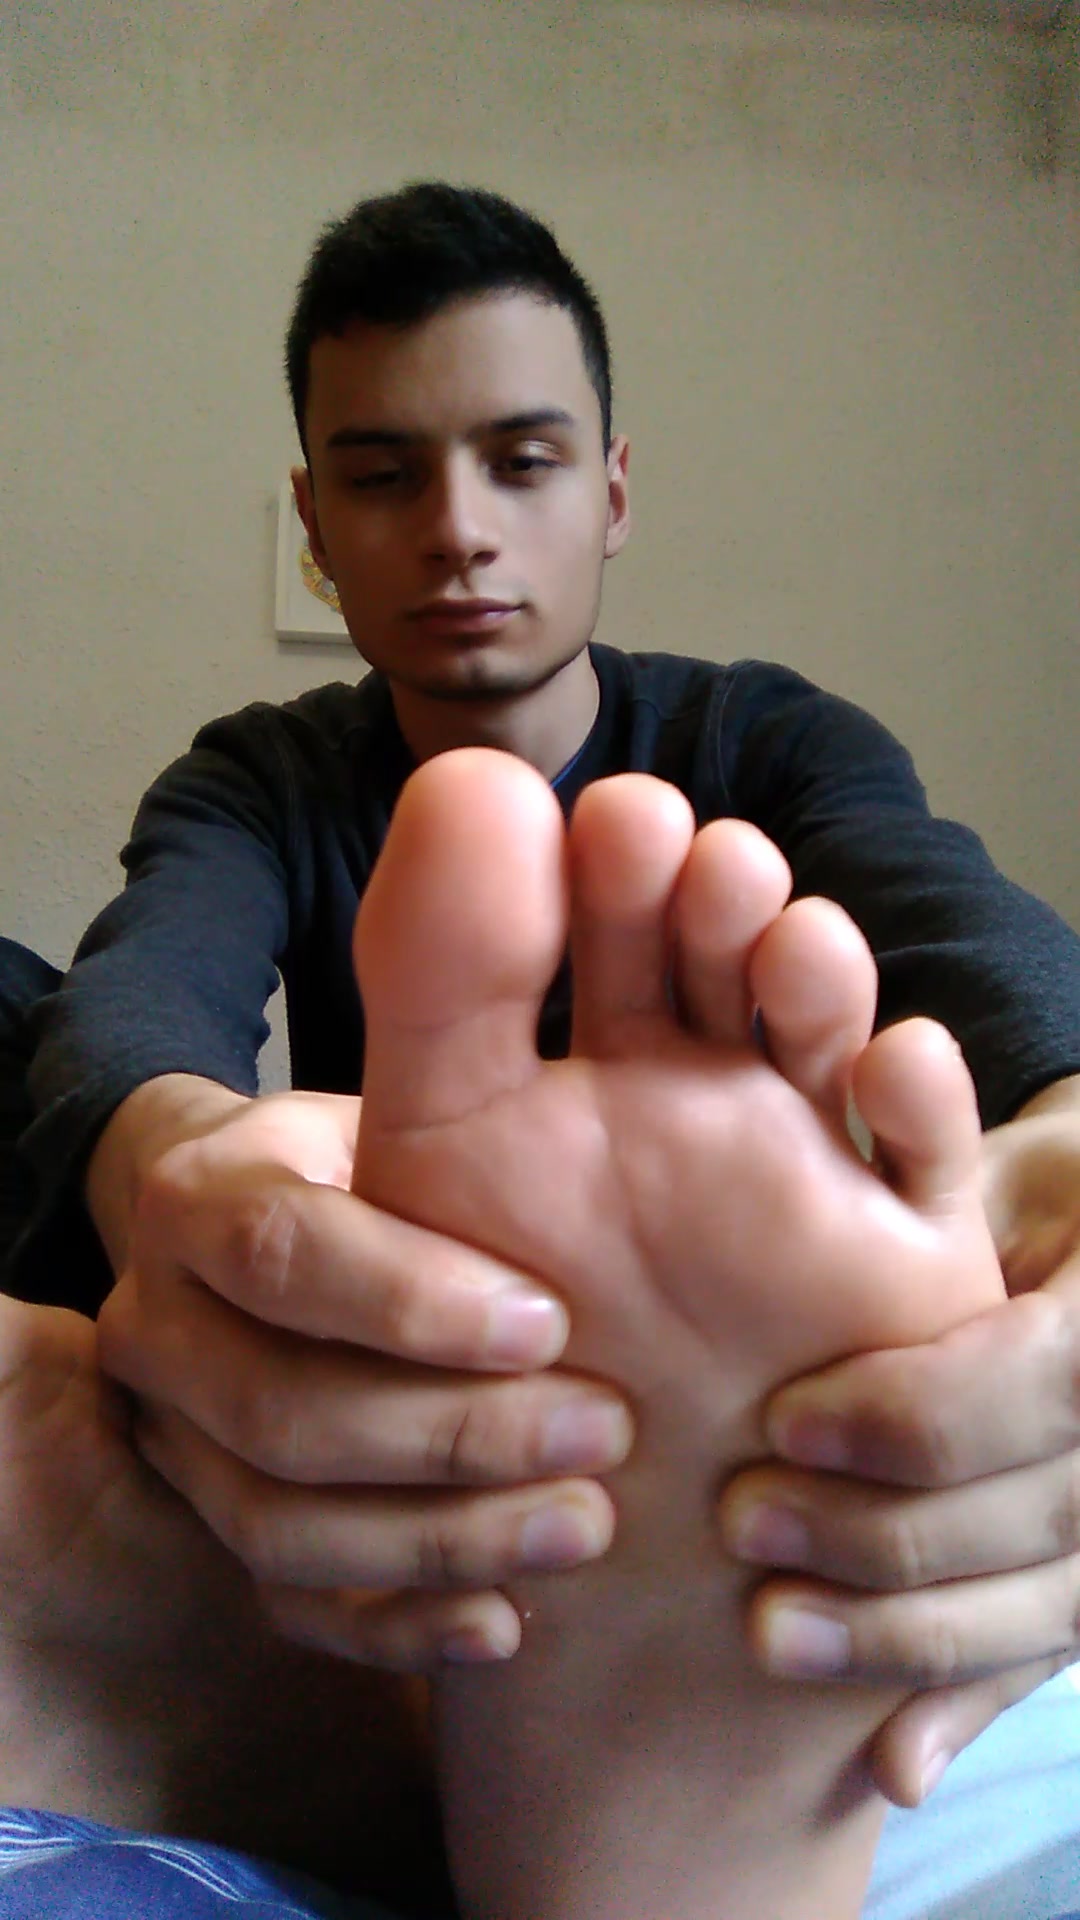 Teasing you with a foot massage